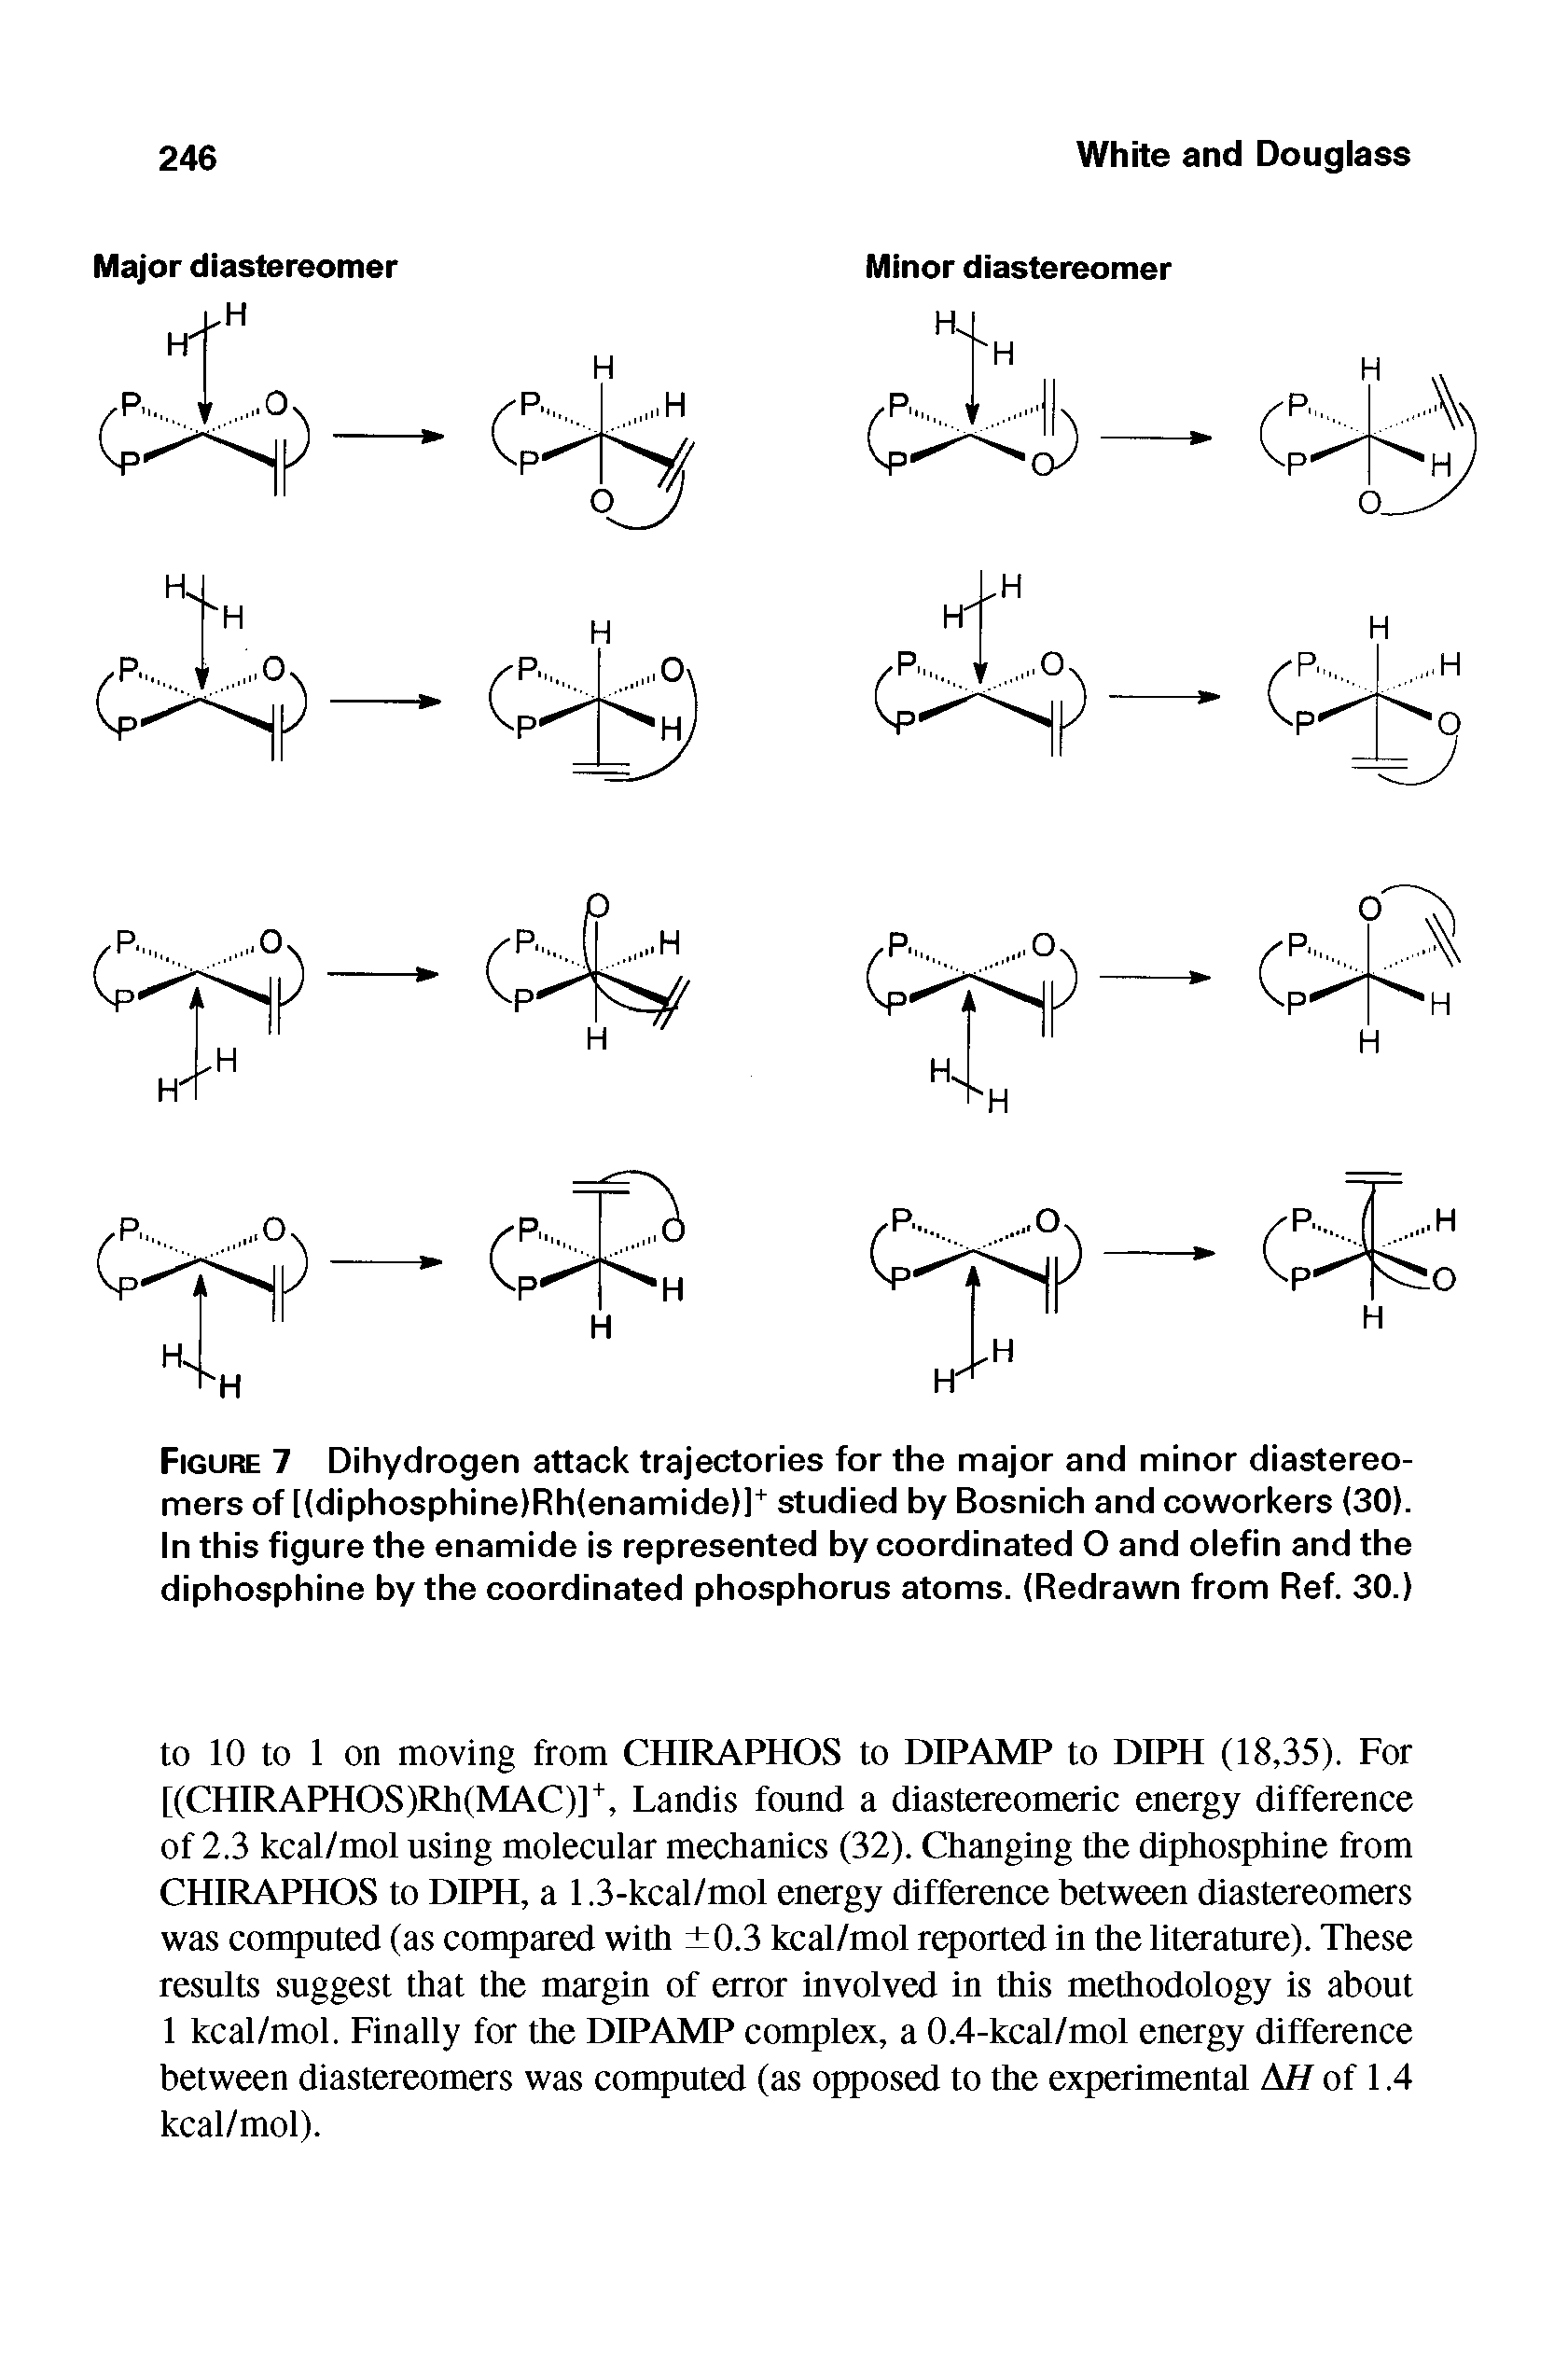 Figure 7 Dihydrogen attack trajectories for the major and minor diastereo-mers of [(diphosphine)Rh(enamide)] studied by Bosnich and coworkers (30). In this figure the enamide is represented by coordinated O and olefin and the diphosphine by the coordinated phosphorus atoms. (Redrawn from Ref. 30.)...